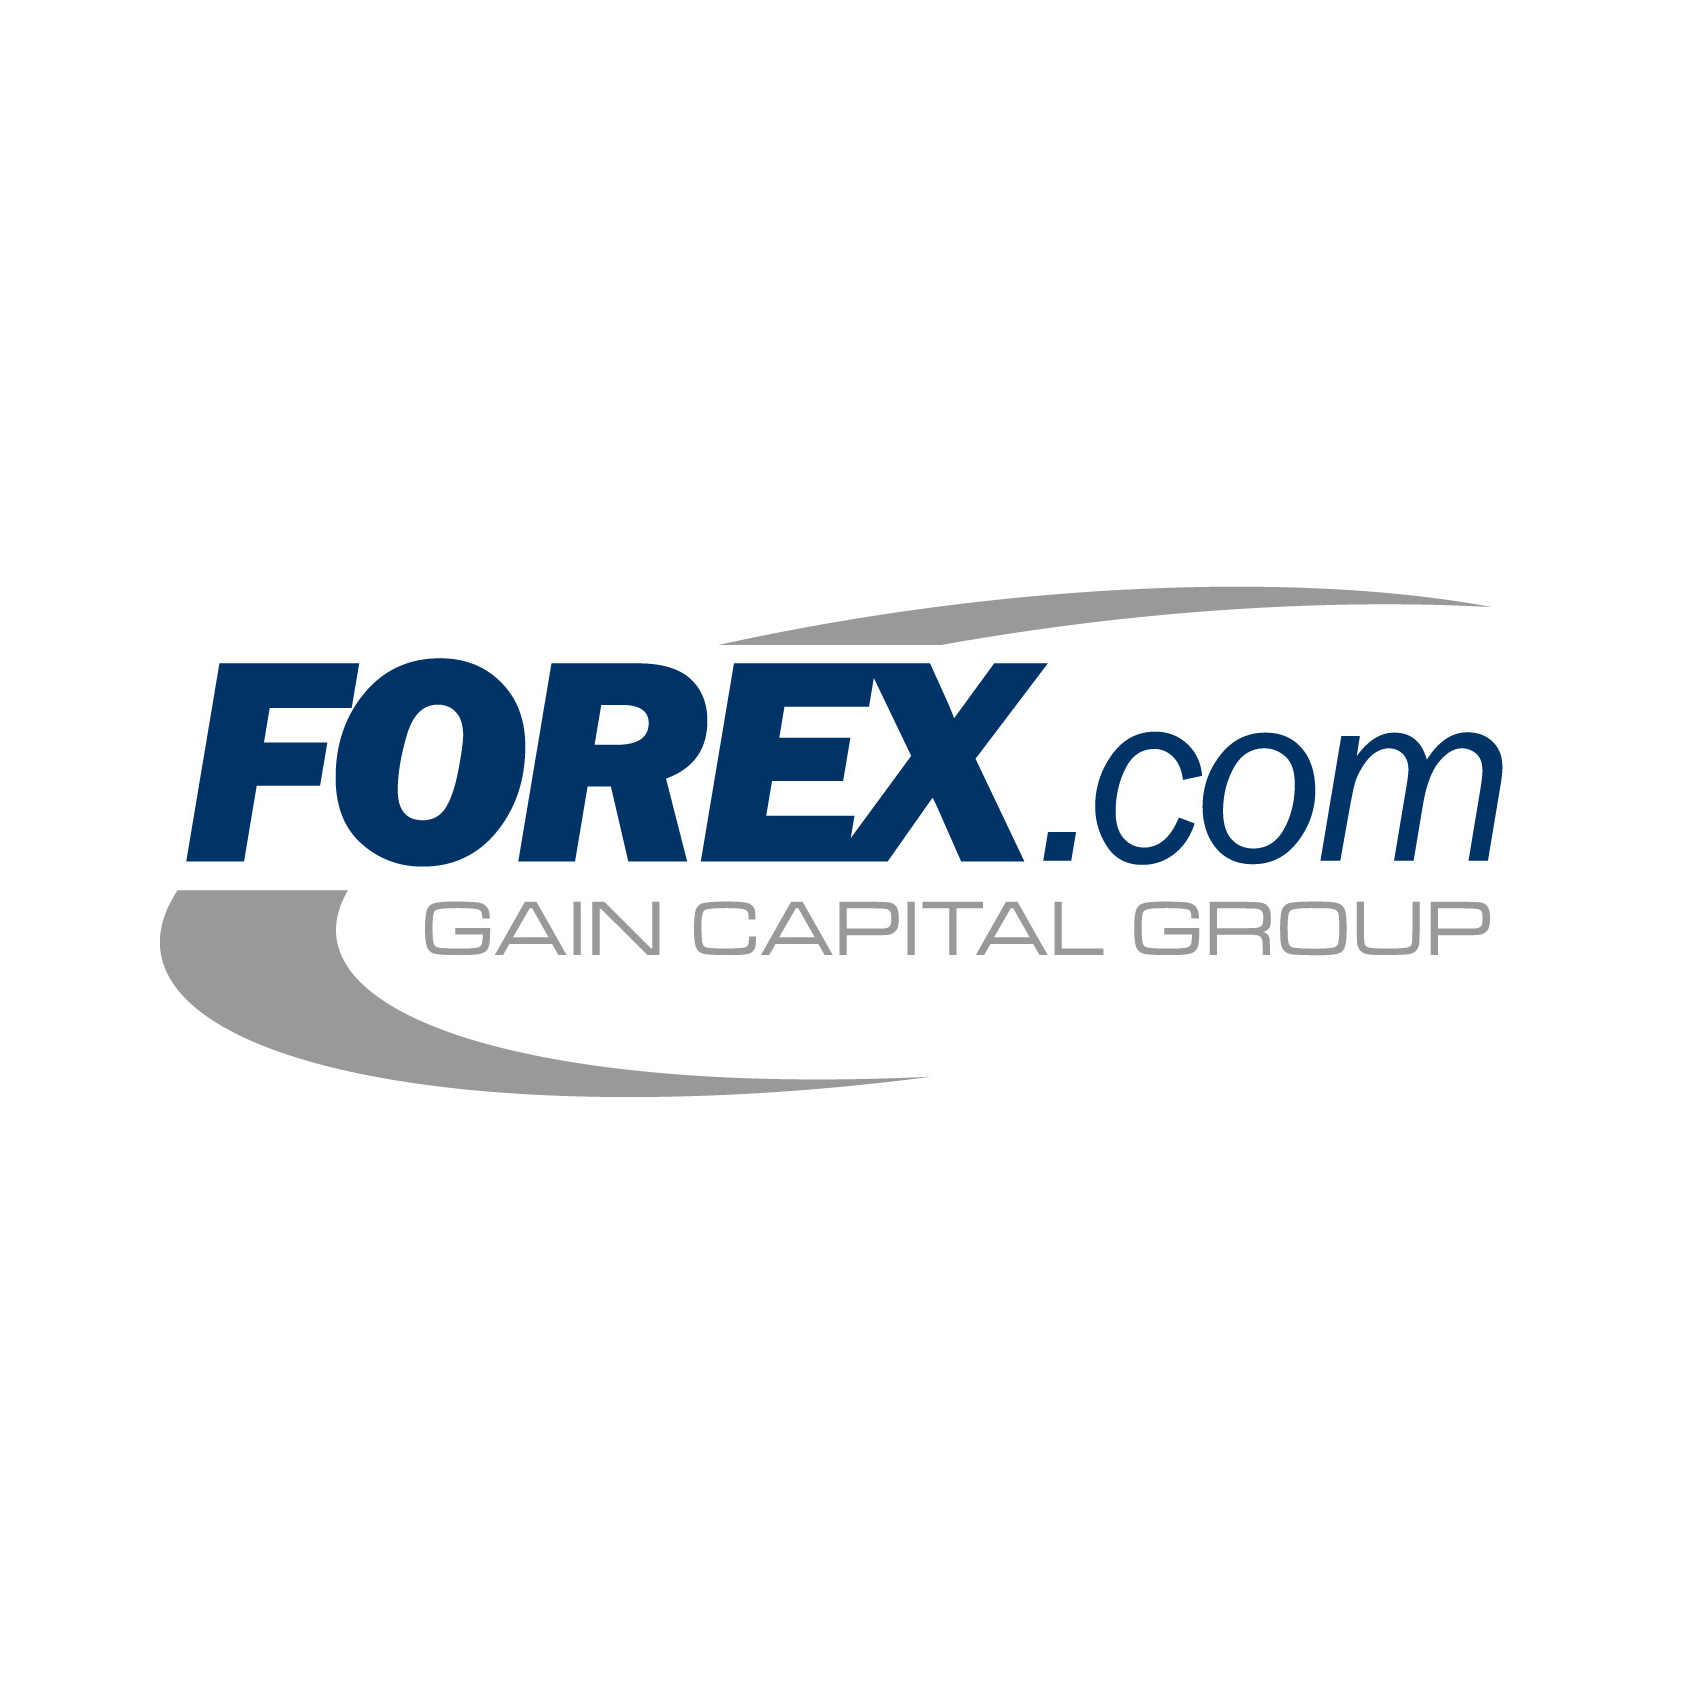 Forex group names